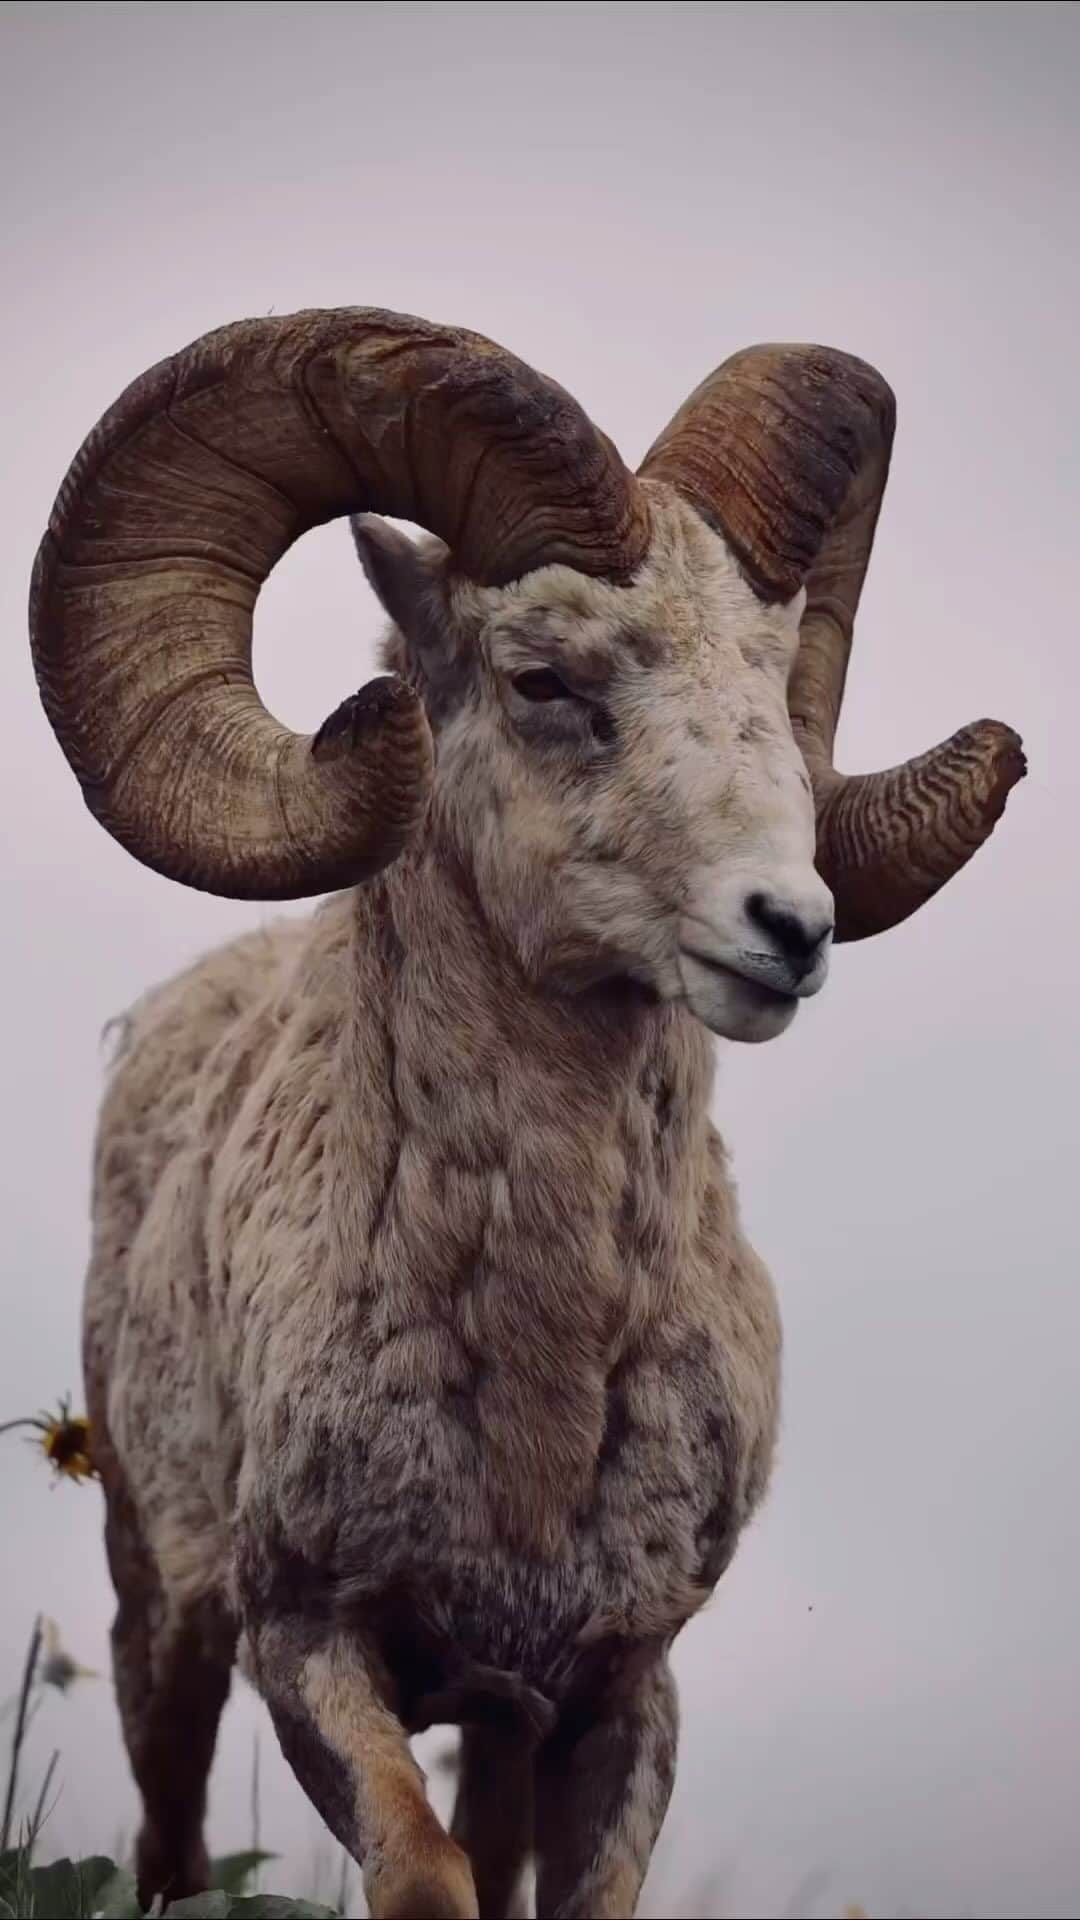 Cute baby animal videos picsのインスタグラム：「The oldest Ram on the mountain 🏔️  Song : Left Me @skars check it out  - - Follow us @cutie.animals.page for more !! 💙 - - Credit 📸 @inthesemountains DM for removal)🙏🏻 - - #animals #nature #animal #pets #love #cute #wildlife #pet #cats #dog #photography #dogs #instagram #cat #naturephotography #of #photooftheday #dogsofinstagram #animallovers #wildlifephotography #petsofinstagram #birds #catsofinstagram #instagood #petstagram #art #animalsofinstagram #puppy #bird #bhfyp」